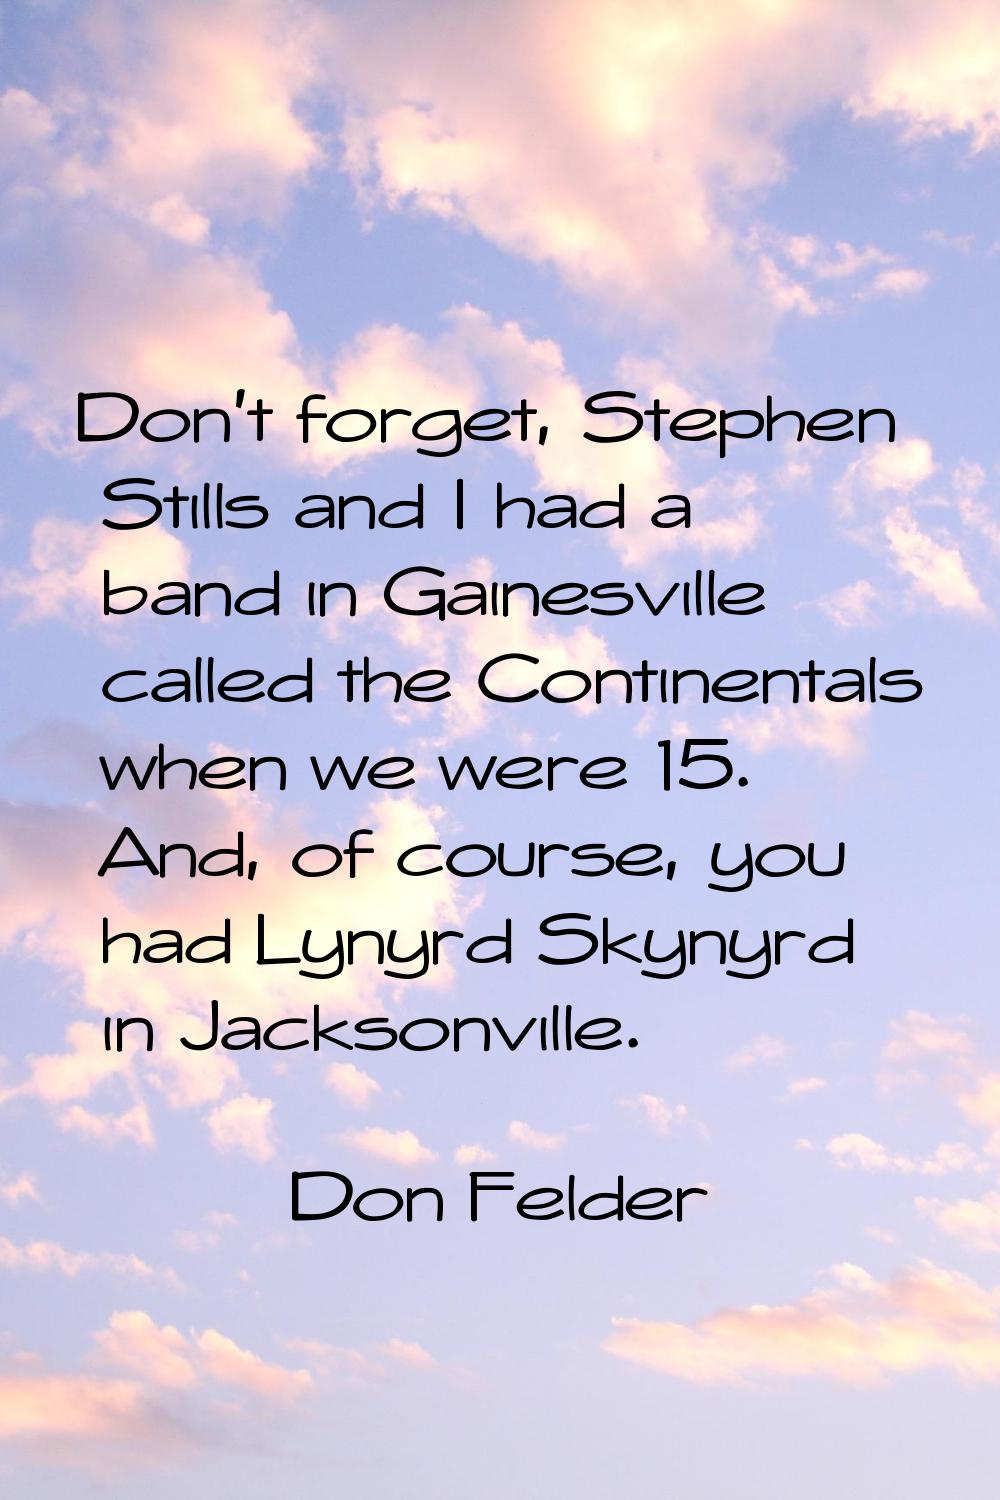 Don't forget, Stephen Stills and I had a band in Gainesville called the Continentals when we were 1